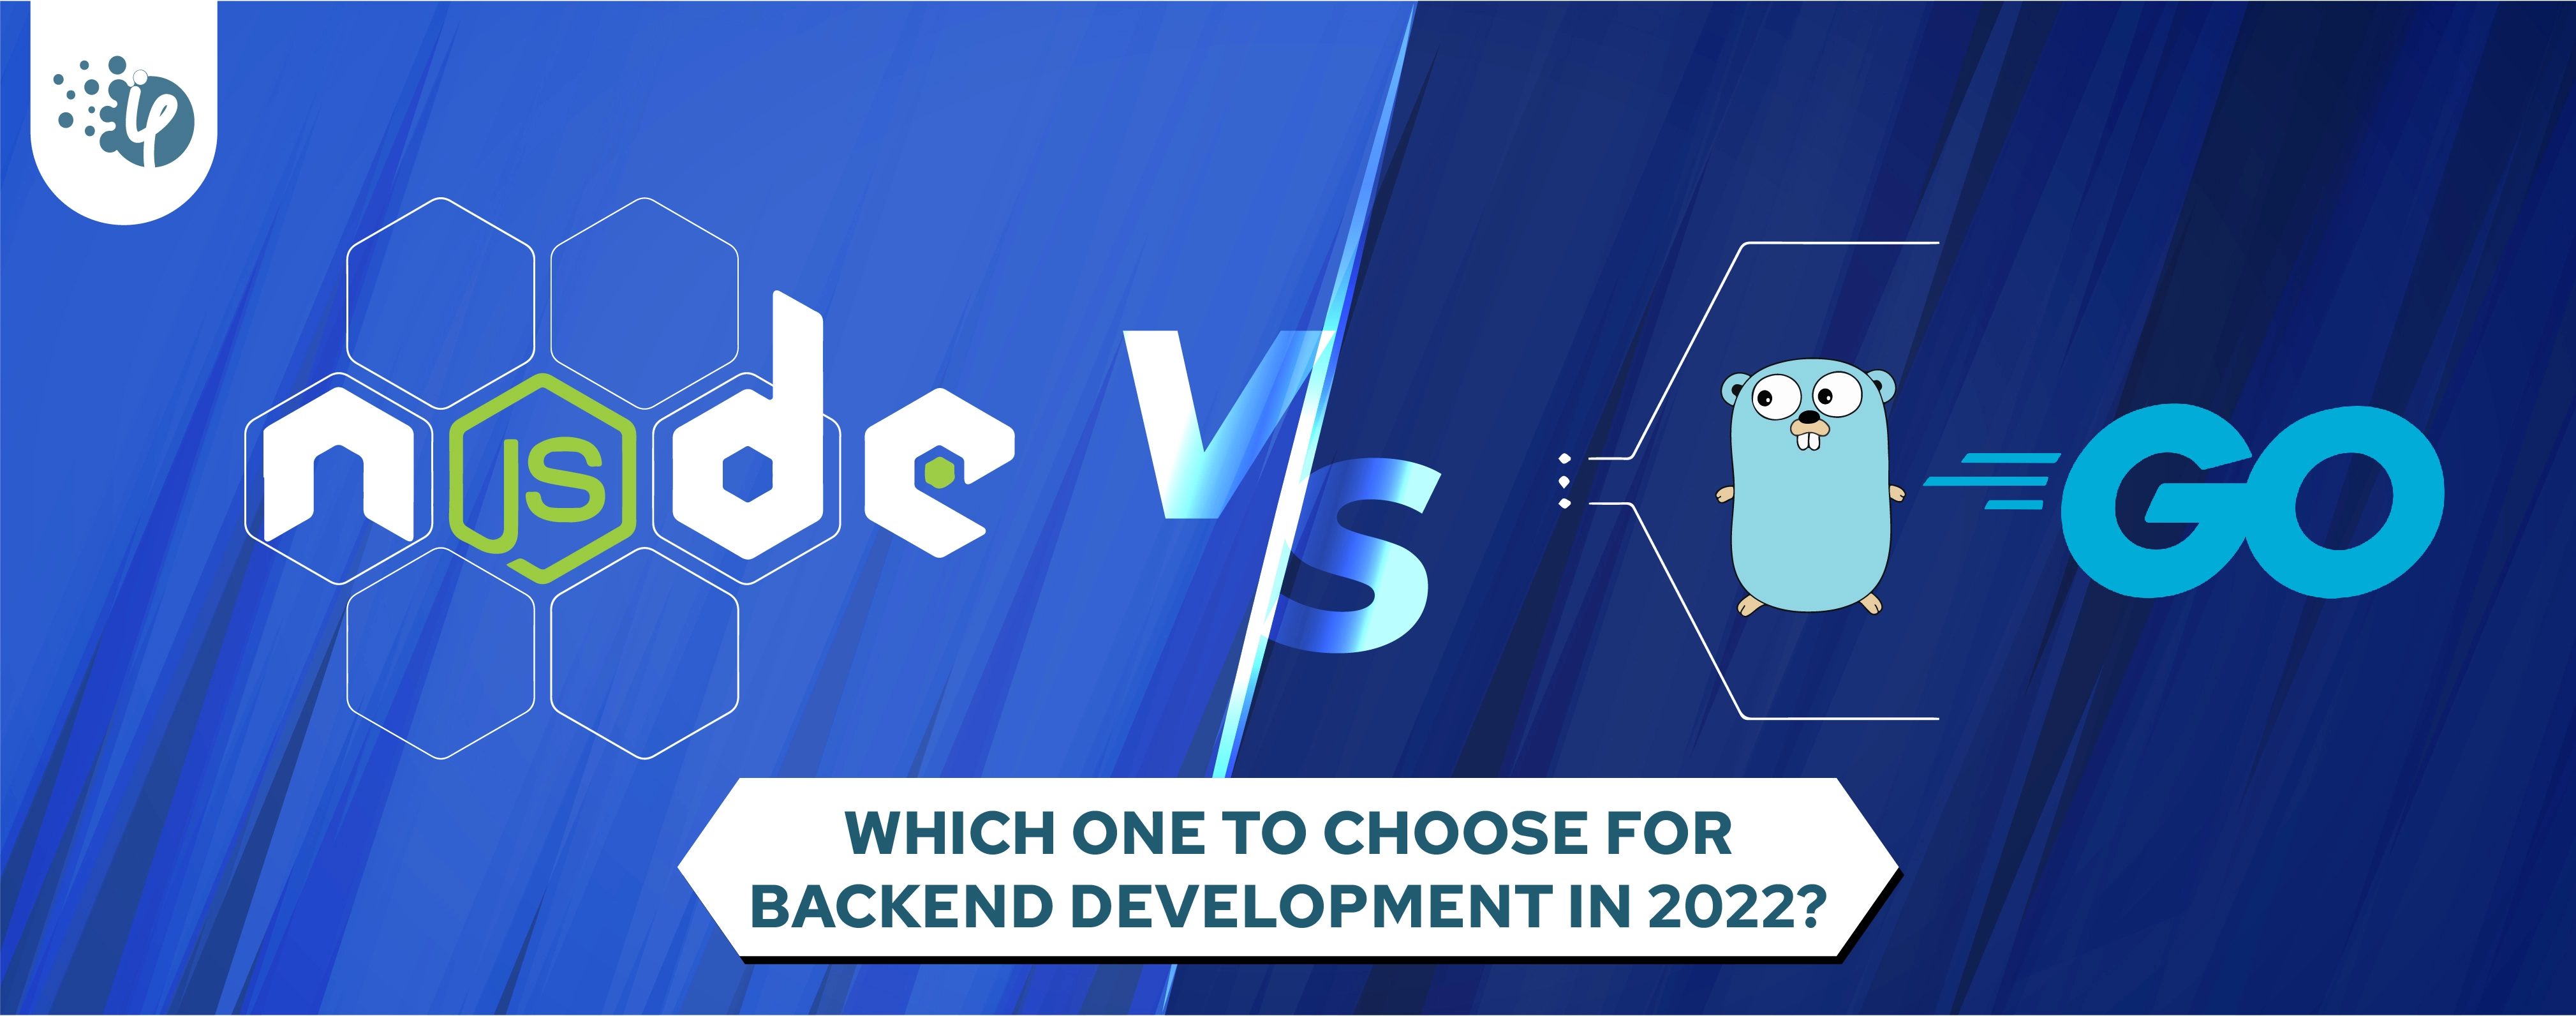  Node vs Go: Which one to choose for Backend development in 2022?